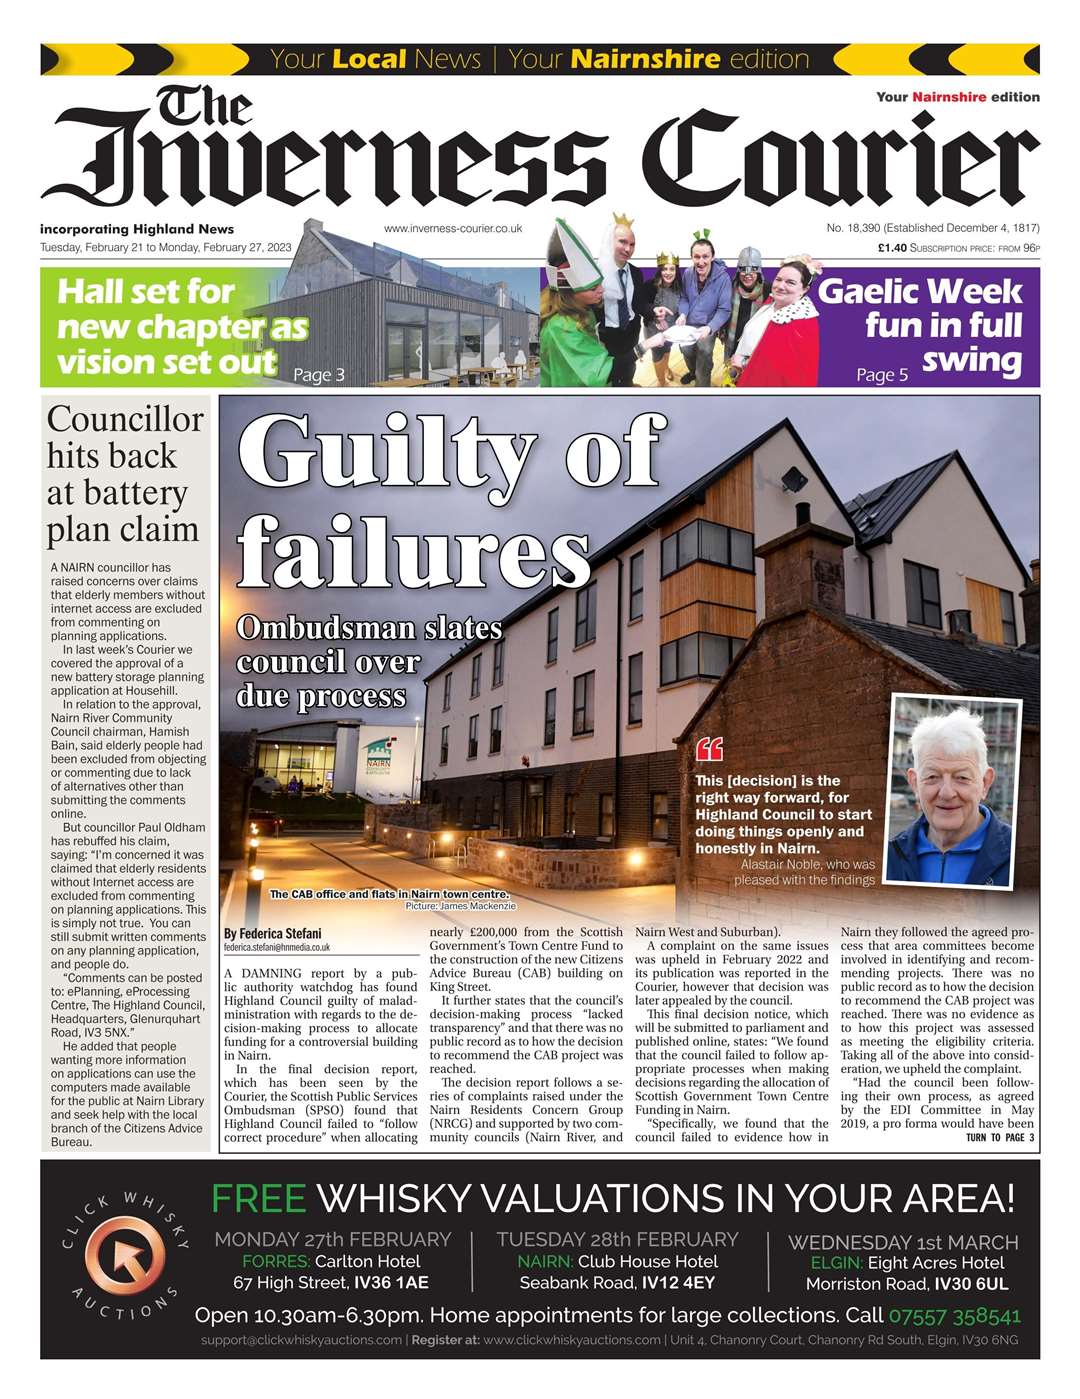 The Inverness Courier (Nairnshire edition), February 21, front page.